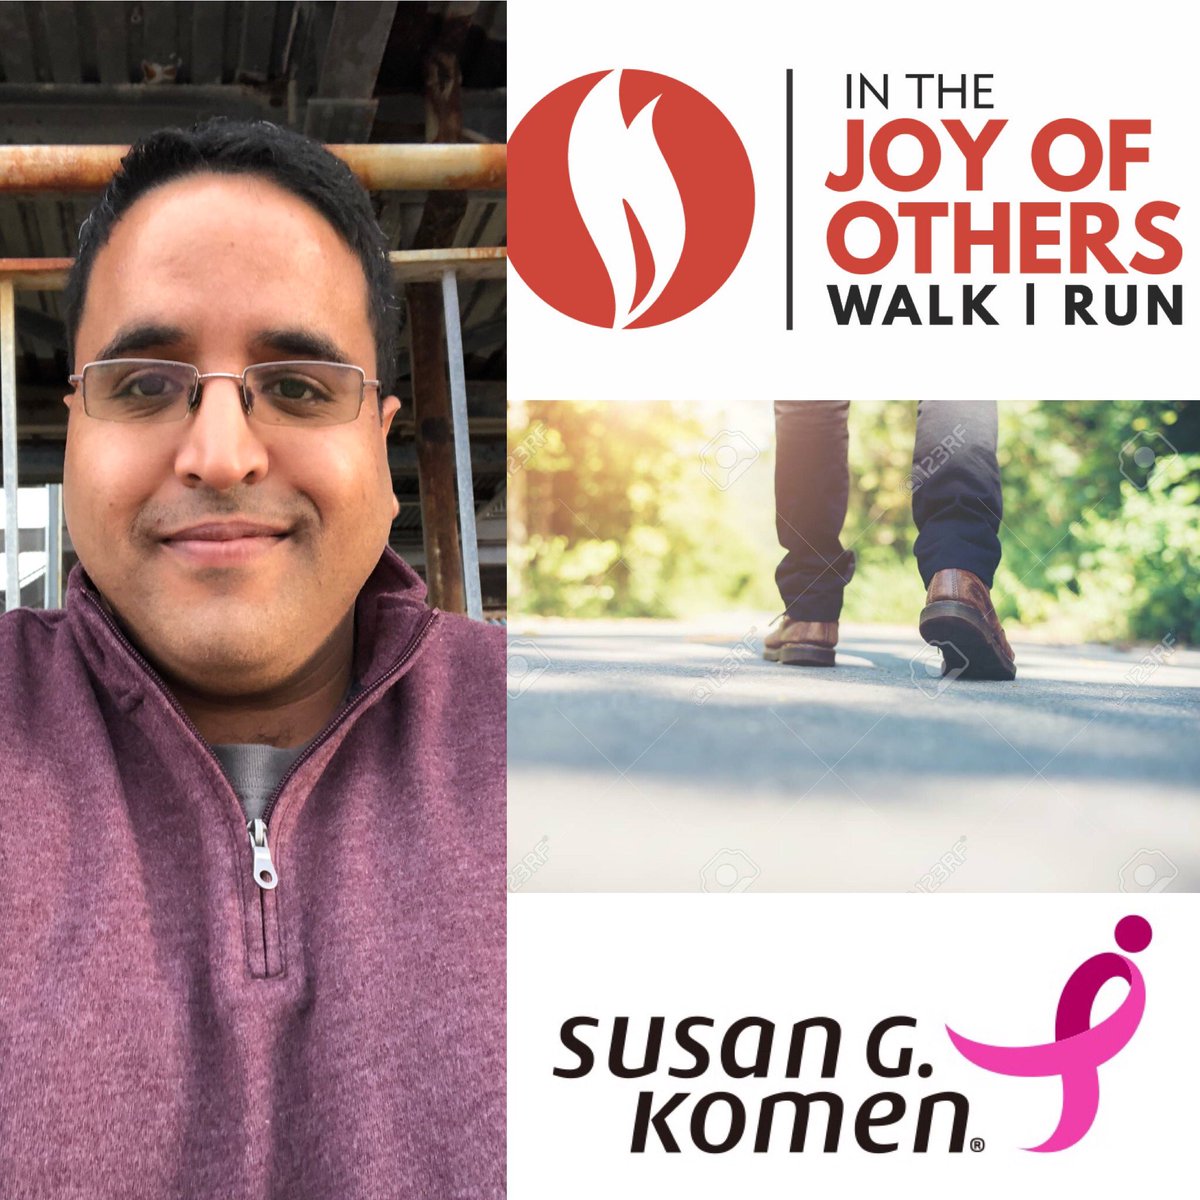 From June 19th to June 30th, I will be dedicating 2,000 steps towards @BAPSCharities 100 Million Steps goal for #JoyOfOthersWalk, benefiting @SusanGKomen.  Please support me by visiting my personal webpage of:

bapscharities.org/user/mjpatel80

#BAPSCharities #SusanGKomen #BreastCancer